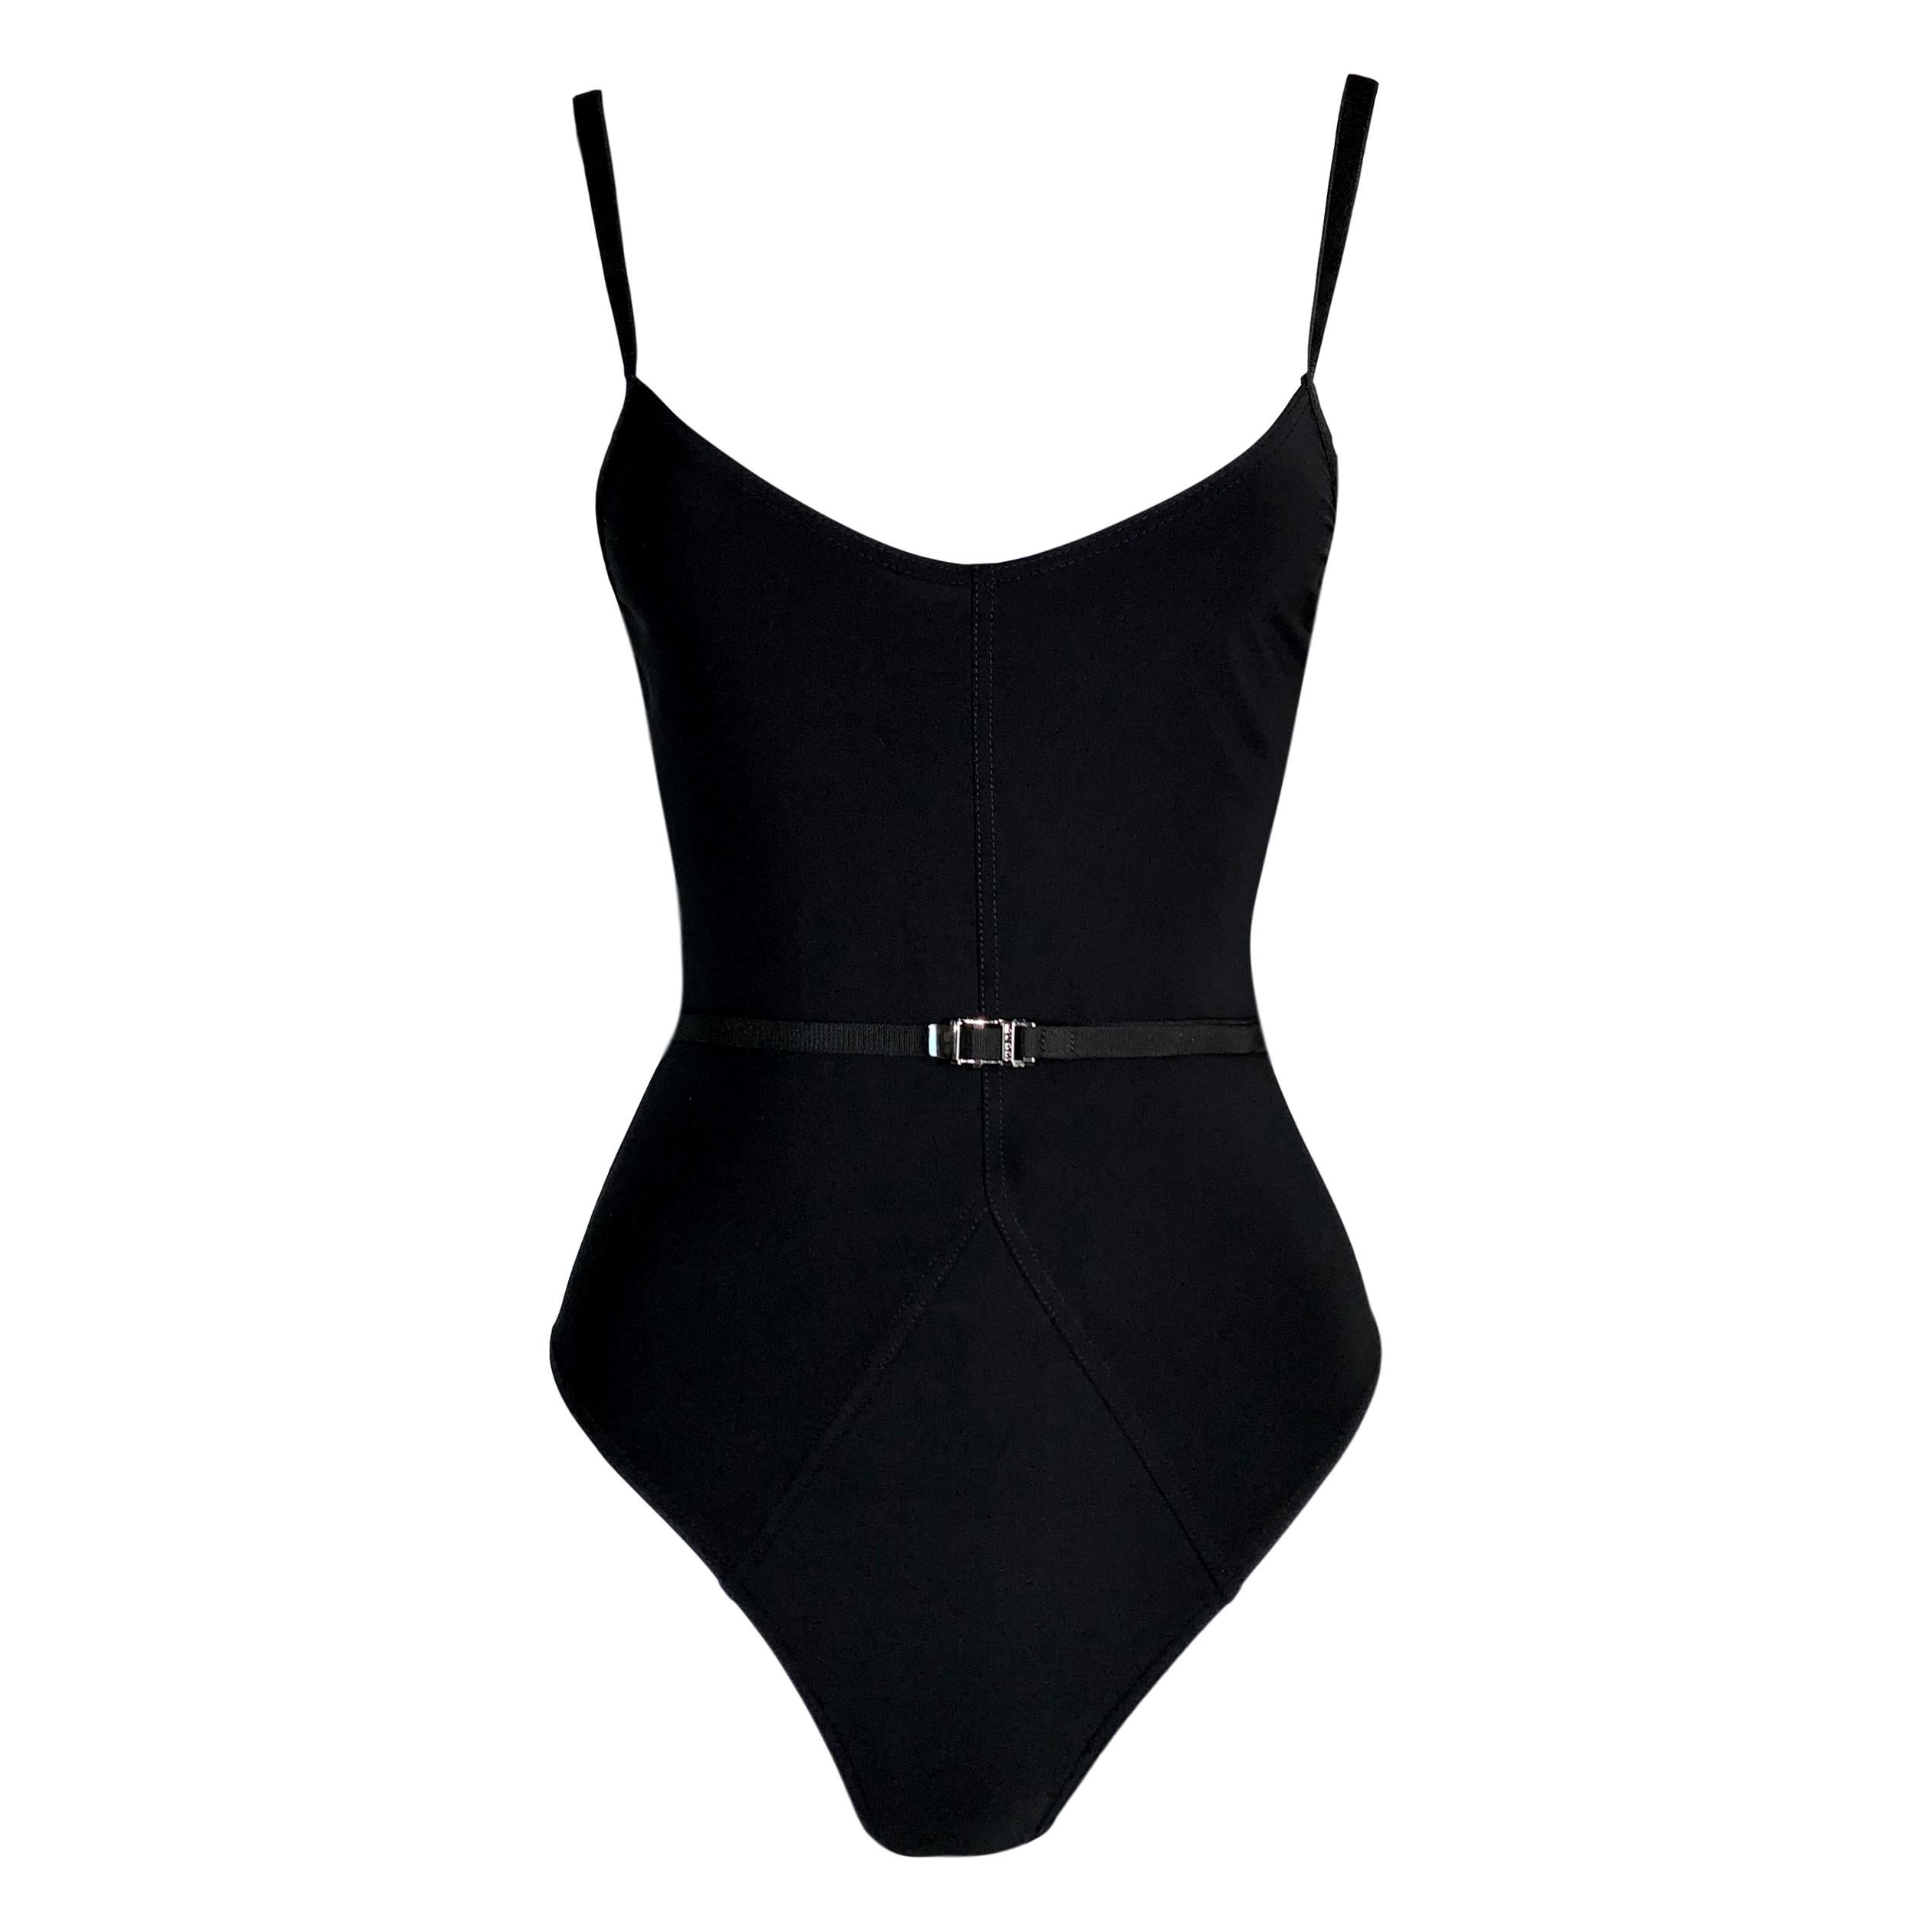 1990's Gucci Tom Ford Bond Girl Black Belted Plunging Swimsuit Bodysuit